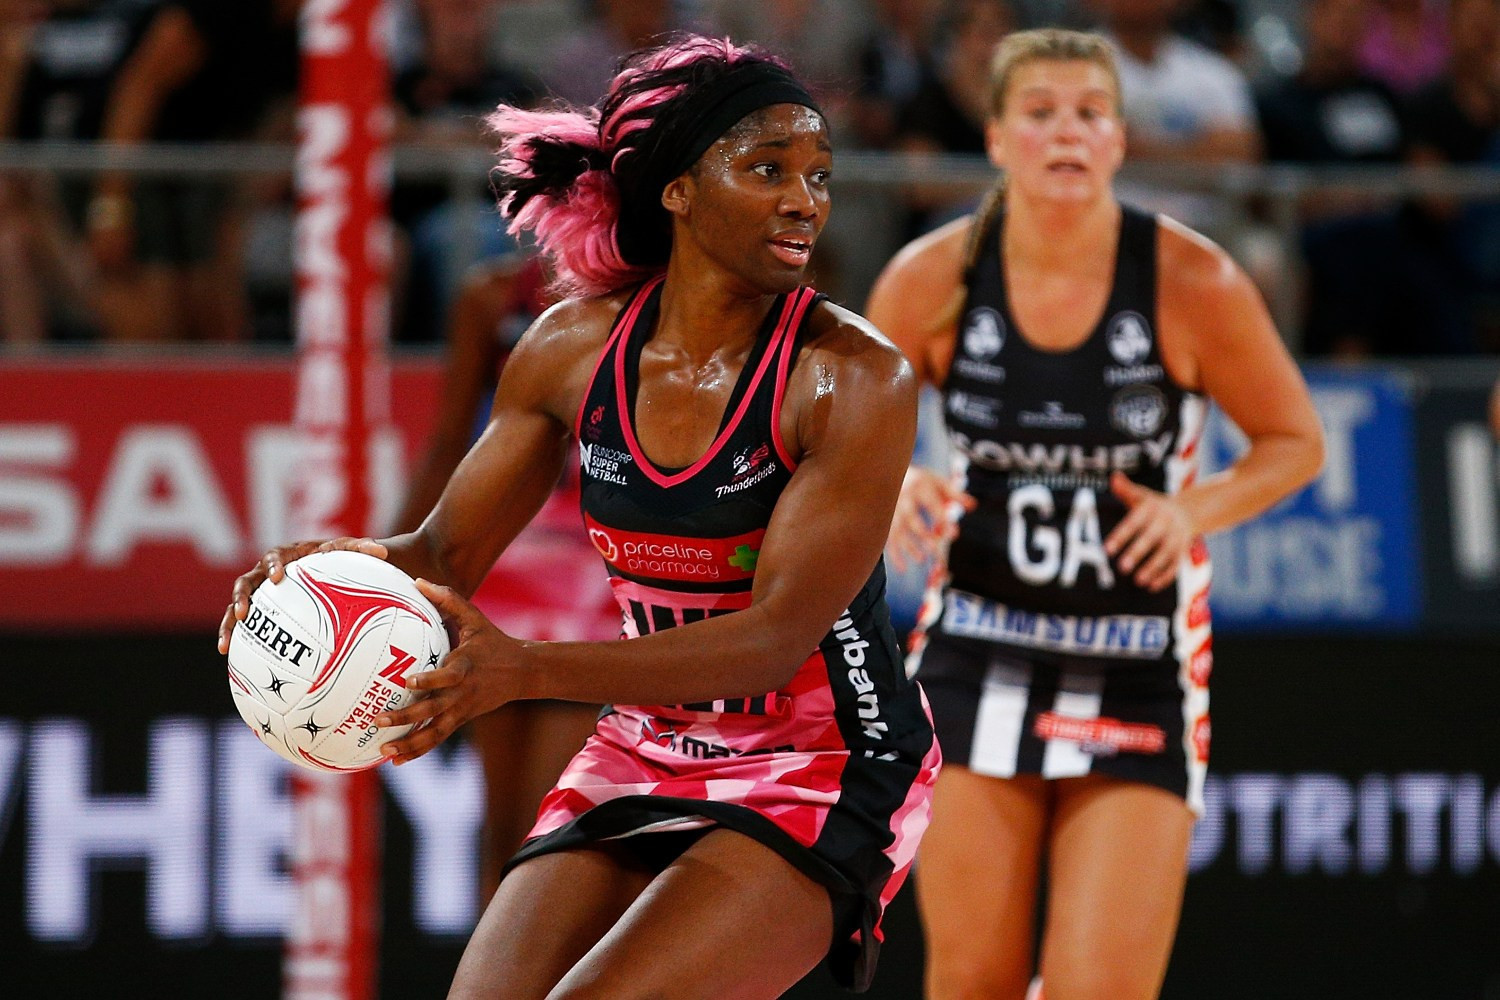 England netball squad for Gold Coast 2018 announced